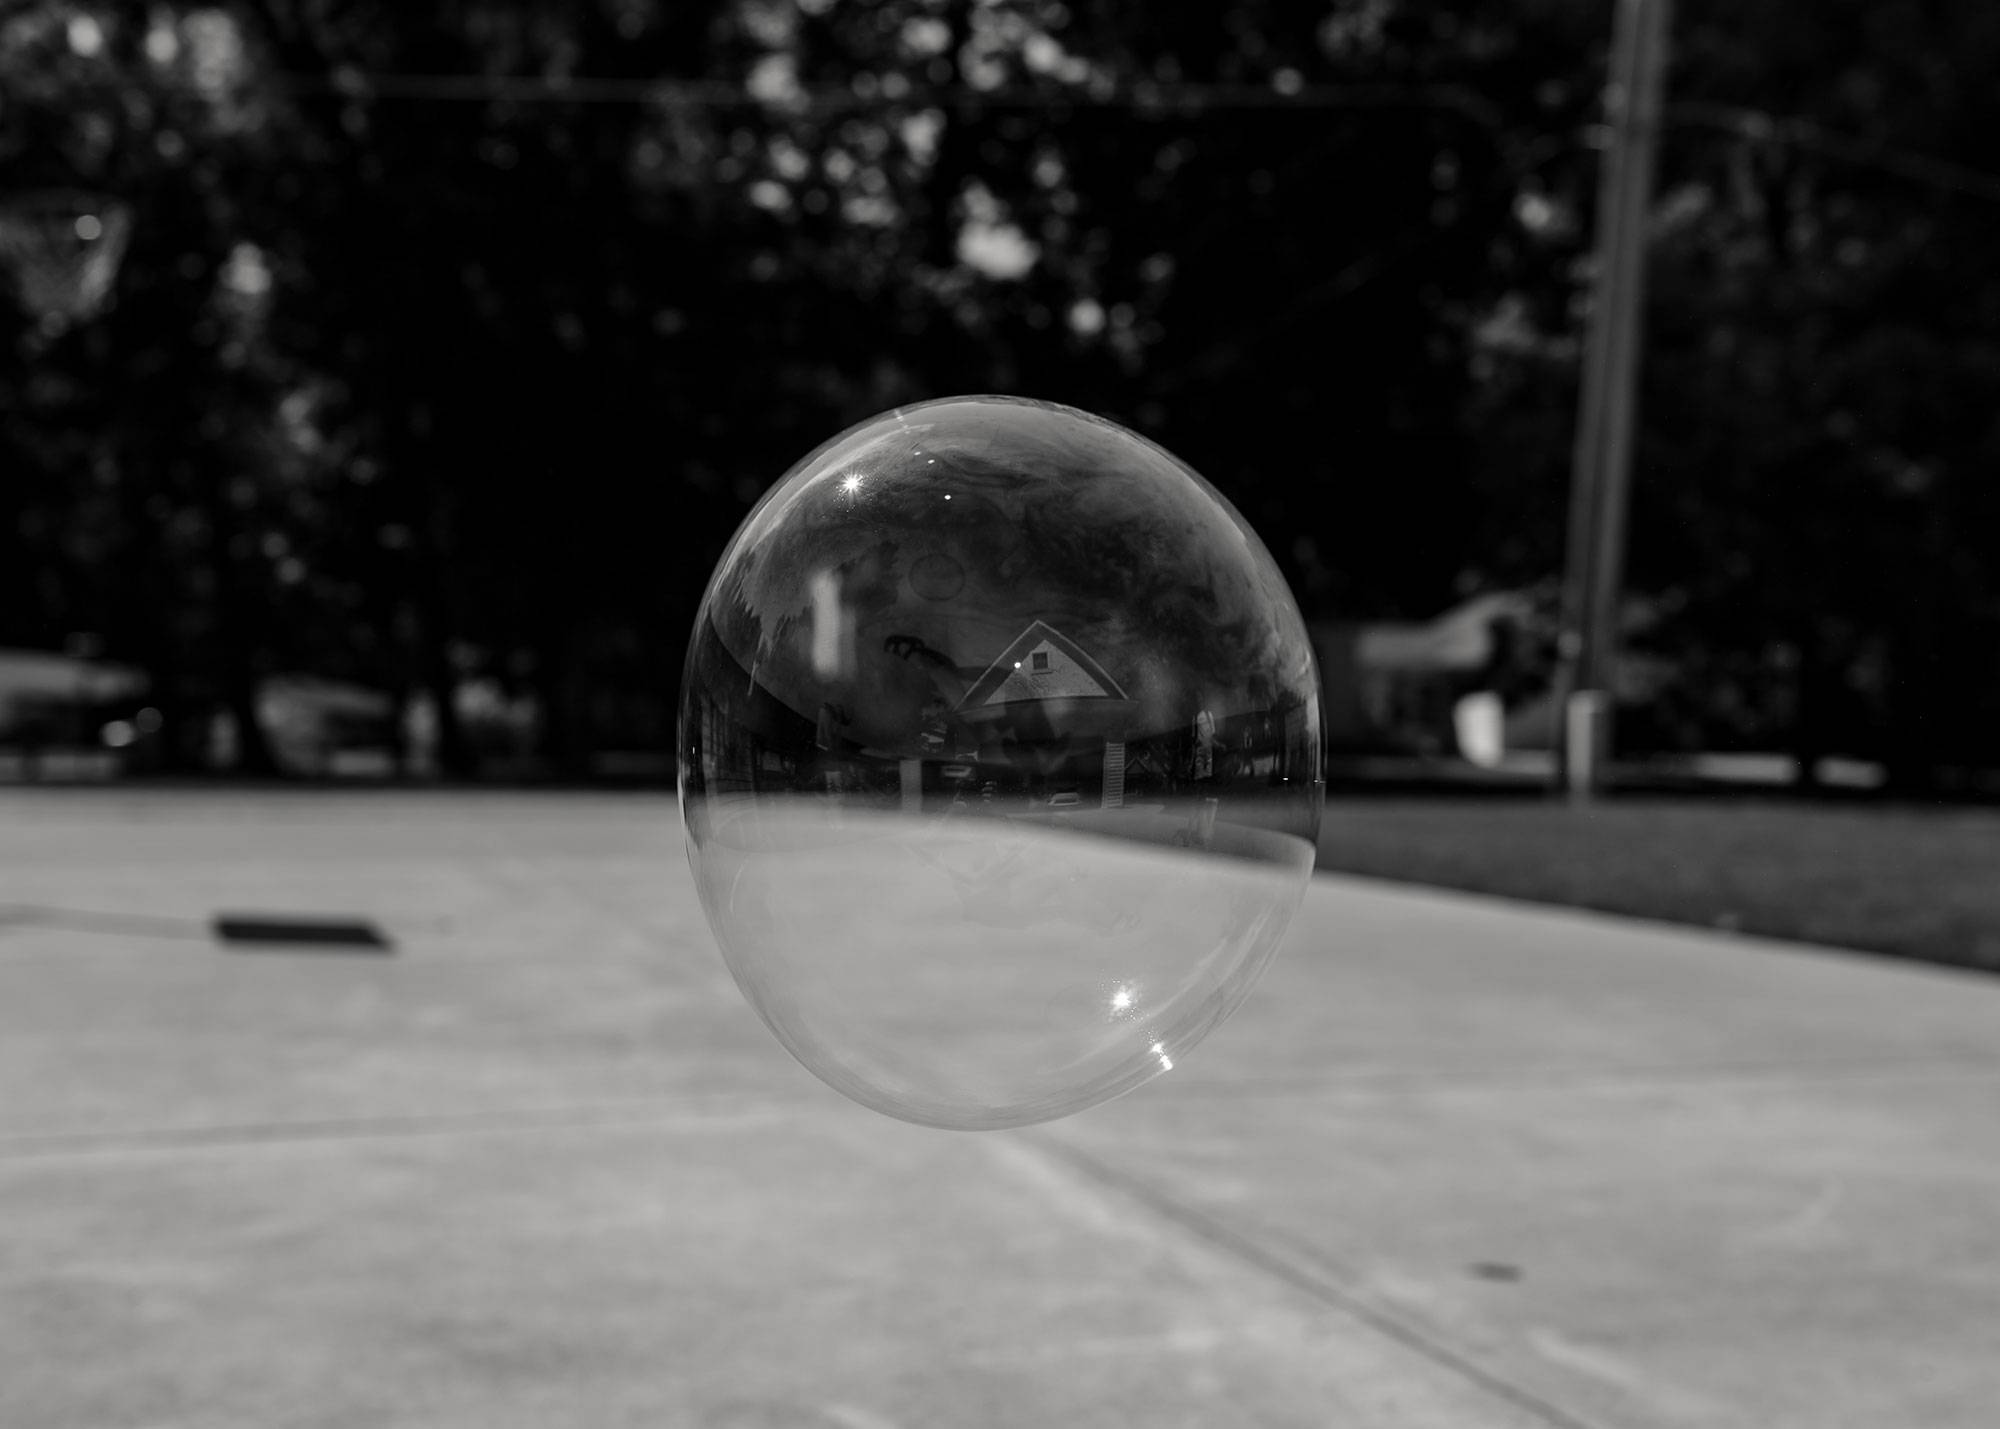 Giant Bubble Showing Reflection Of A House